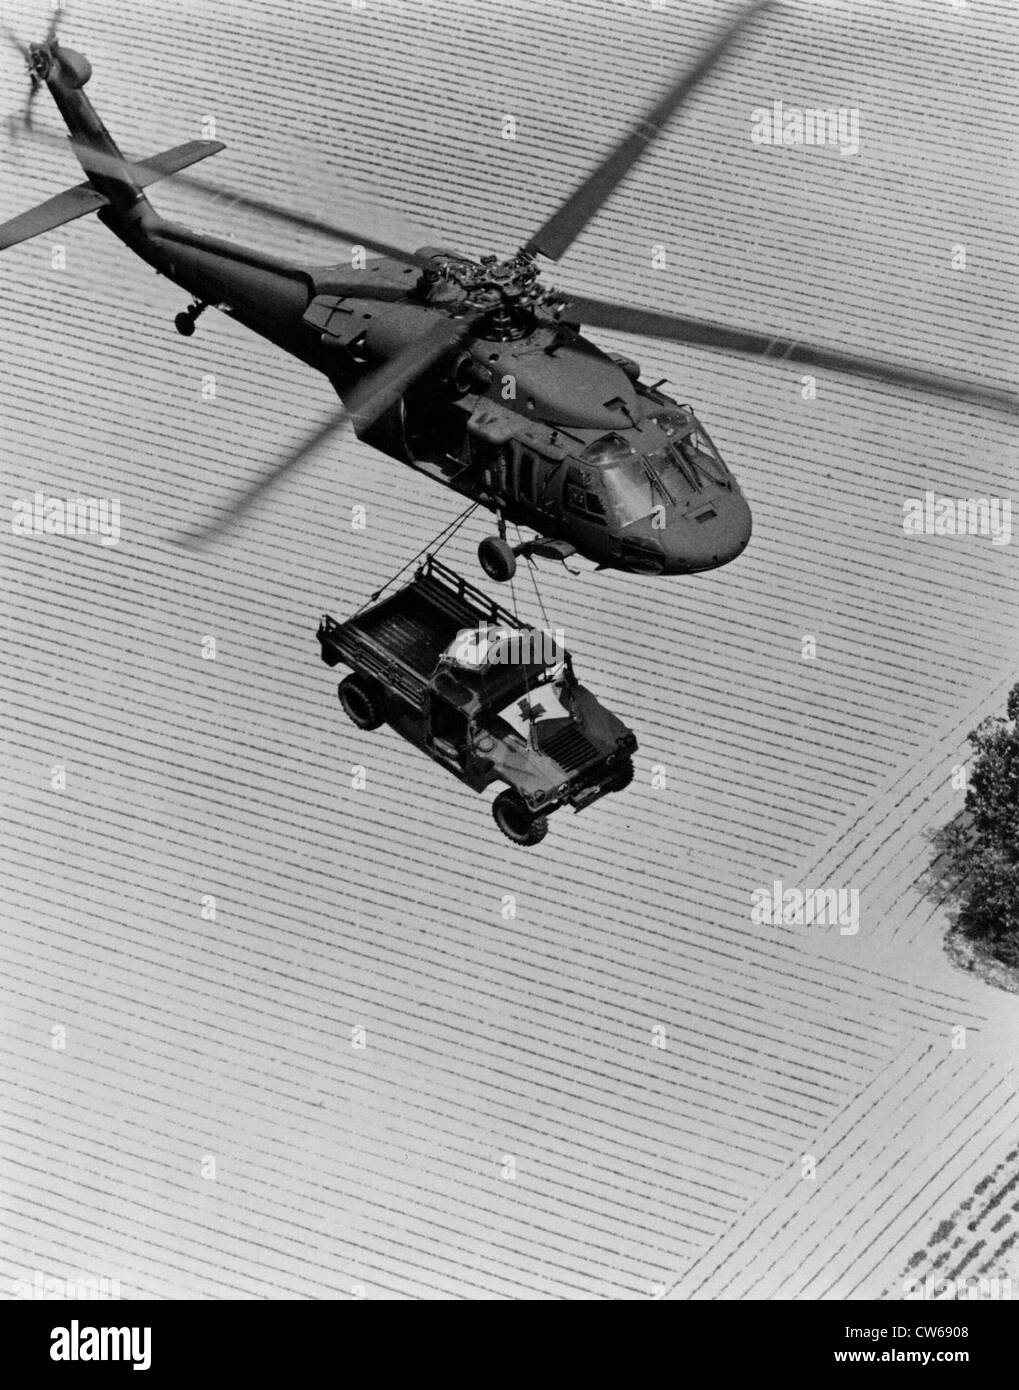 American Sikorsky CH-64 elicottero Super-Stalion Foto Stock